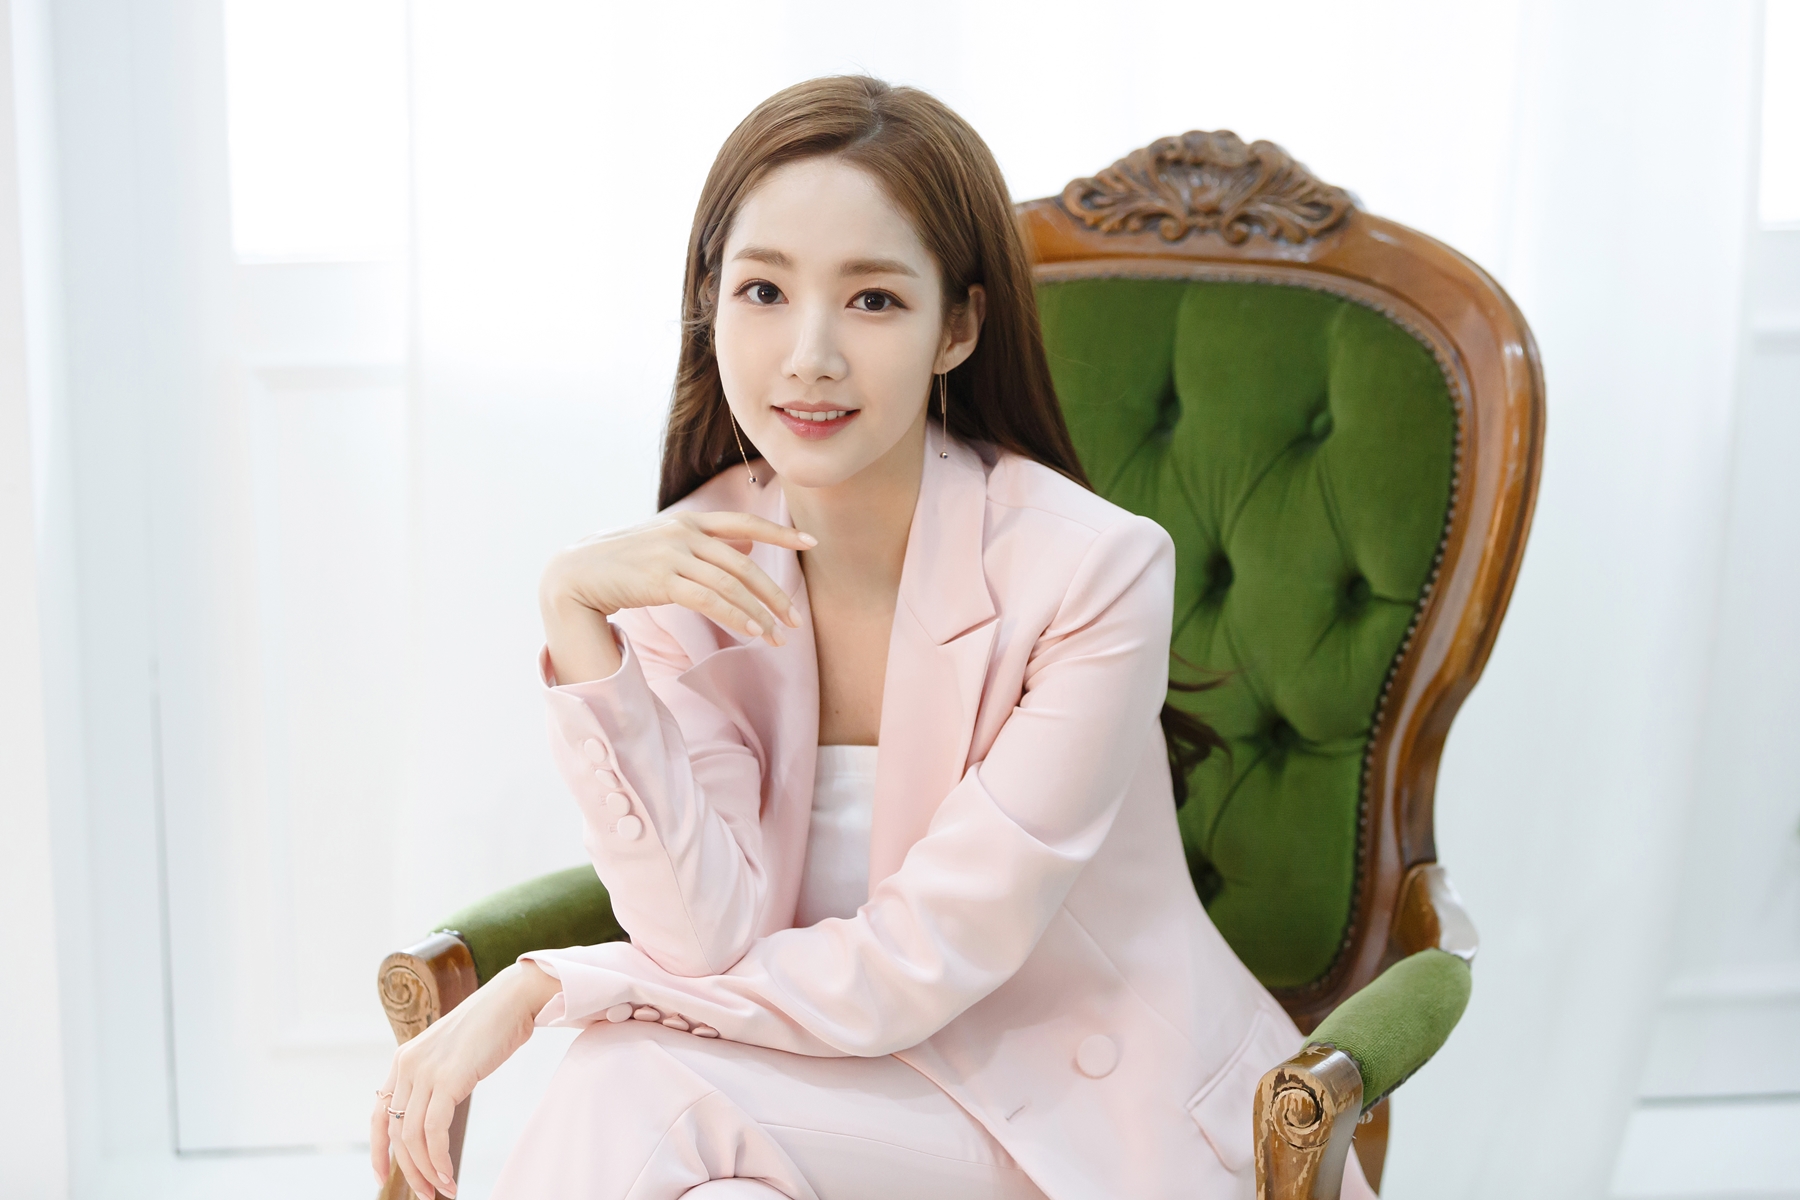 Following the Interview 1) Actor Park Min-young was selected as Kim Mi-so, the title roll of the TVN drama Why is Secretary Kim doing that?Lee Young-joon (Park Seo-joon), vice chairman of Narcissist who has everything to do with his financial power, face, and skills, and Kim Mi-so (Park Min-young), a secretary-general who has fully assisted him, are now out of office.The meeting between Park Seo-joon and Park Min-young, a new Roco Queen, has made headlines.Park Min-young said, I did not have the burden because it was a title roll. I think the same attitude and attitude every time I enter the work.Because TVN work is the first time, it is not because it is a title roll, but because it appears in a dramatized work of a funny webtoon, I felt burdened by the part that I had to get rid of the injustice as much as possible.I think I did the best I could after all. Park Min-young was Kims secretary soon, and Kims secretary was Park Min-young.Kim Mi-so, who was in Kims secretariat, was a particularly attractive character to Park Min-young, saying, When I read the script, there was a strange point where I was attracted to the character without the most personality in the work.All the other characters are unique characters. And yet, I really wanted to act.Its white to color Kim Mi-so, but its in other fancy colors that make him very noticeable, and I had a belief that you would know and it was a good decision.Park Min-young will work out the schedule that was pushed after the end of Why Secretary Kim Does It. Im not thinking about the next one yet, because I was so into Secretary Kim, Im thinking slowly.I think its right to leave a lot of luck for those who love Kim, and I think it would be nice to have a little more rest in court and historical drama.I want to keep going without stopping, and I want to build up filmography steadily because the year is old, but the film is not diverse and I want to make diversity. Its funny to see an Interview in my twenties, how light it is. When I first made my debut, I said, I should get married at the age of 27. In my mid-20s, I said, I should do it before Im thirty.I dont know anymore. Twelve years have passed in the blink of an eye. Its finally come true.Many working women will agree, but the word well get married in a few years, in a few years is a wordless wish, and I think its right to do it when the timing is right with a really good person.Ill never marry a man, and my life is important, so Ill have a little more love with work and a little more marriage with a man.How do I want to spend the rest of 2018 when I have been busy with 2018? I think 2018 will be a meaningful year for me with just one secretary.Im going to try to keep the rest of the time. Now the acting is so fun. I think well start acting again before we finish.Im going to try my best to save time.